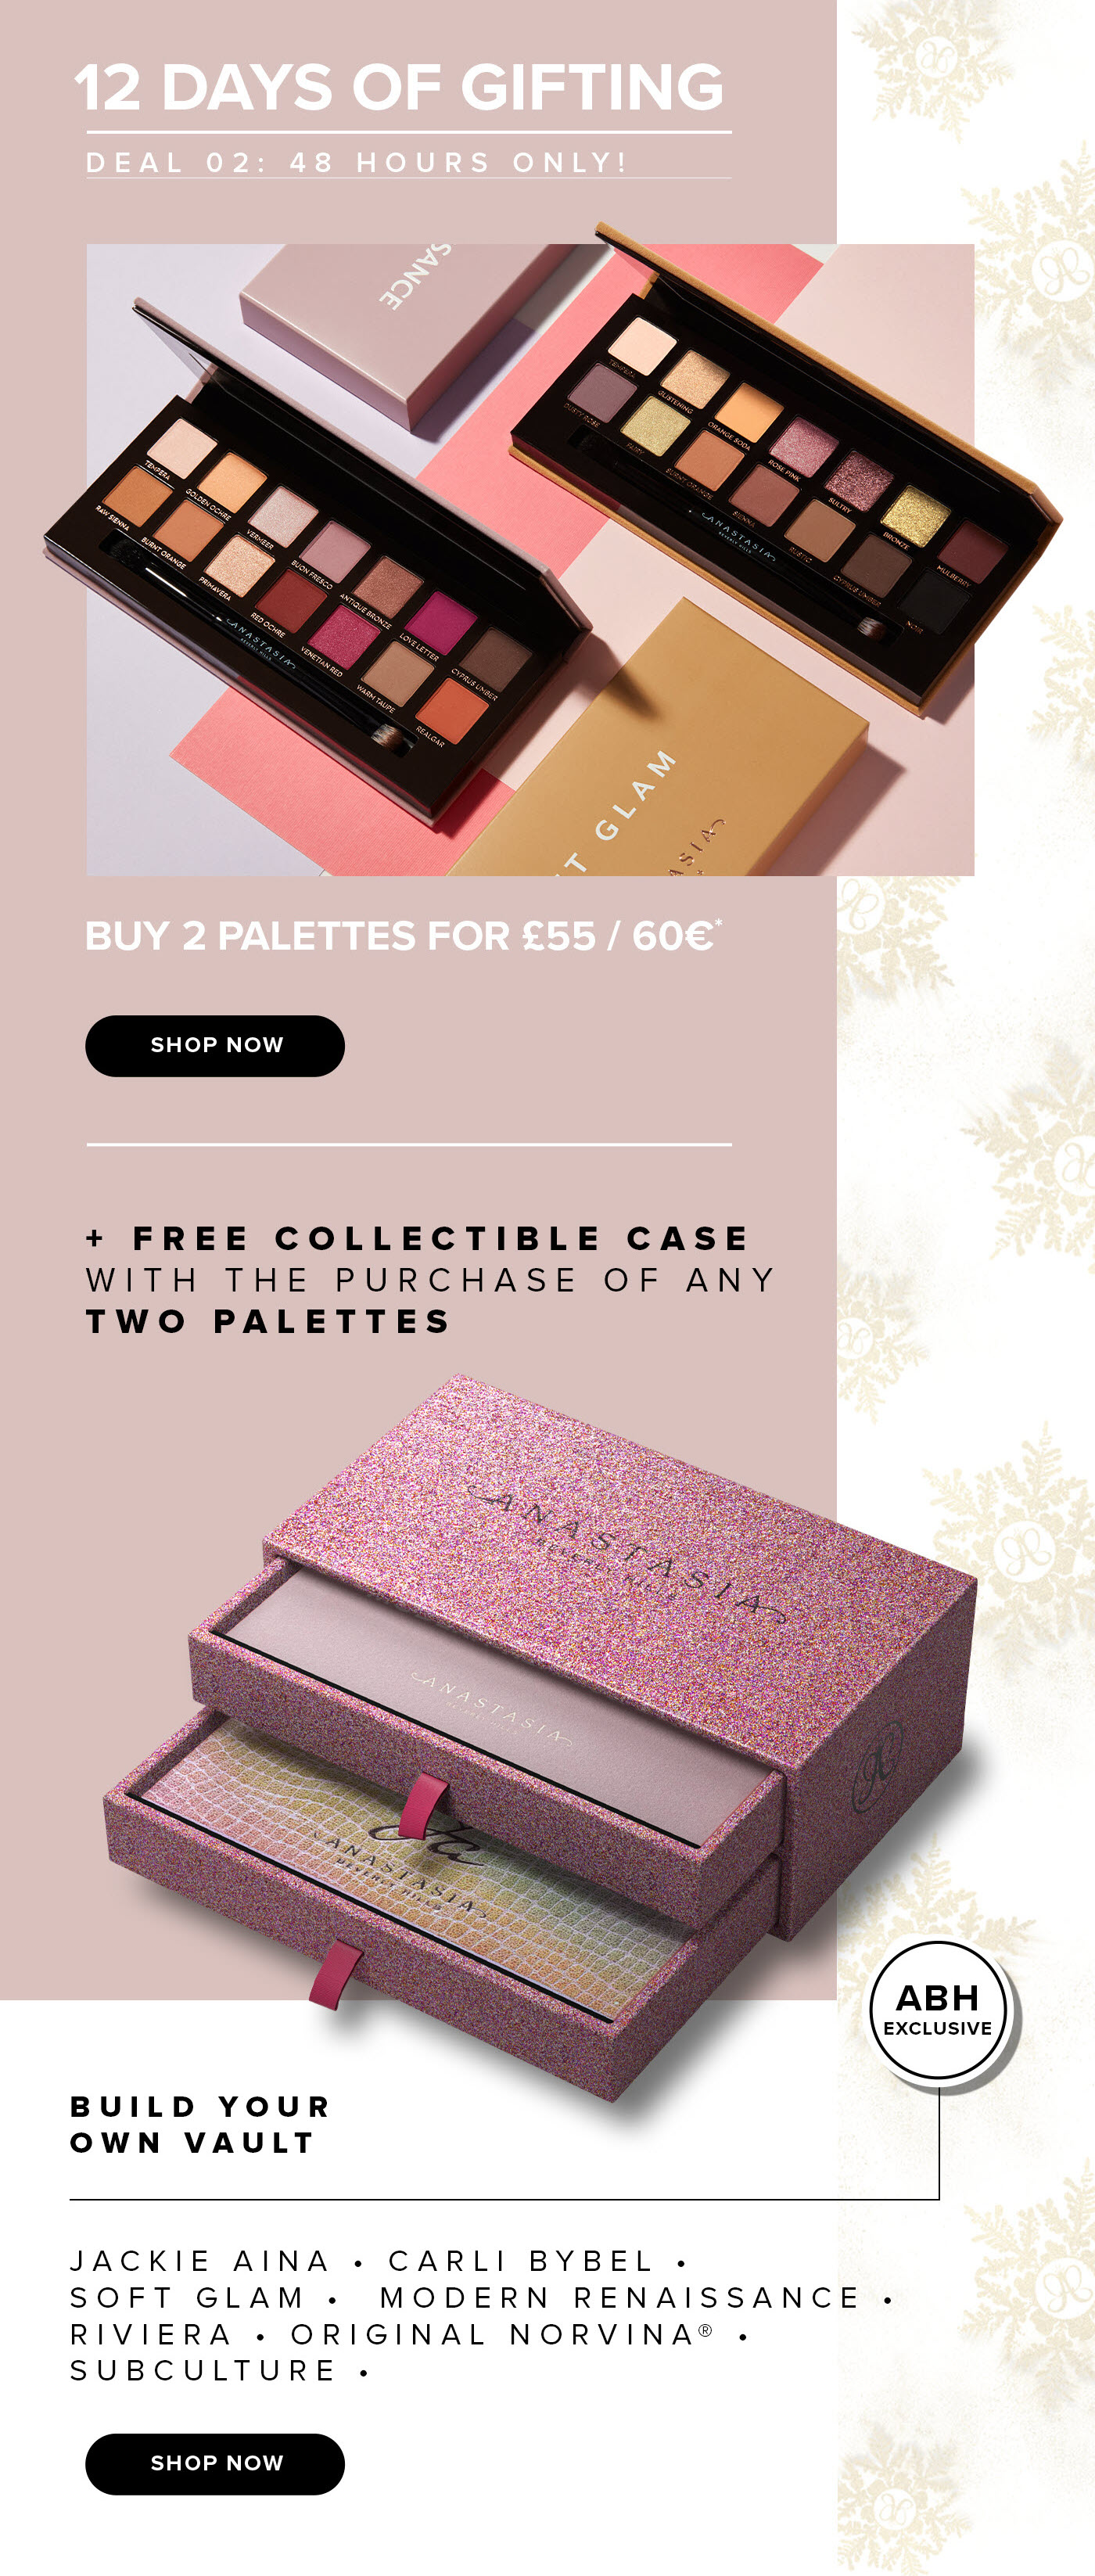 12 Days of Gifting - Deal 2: Buy 2 Palettes for ?55/ 60? + Free Collectible Case